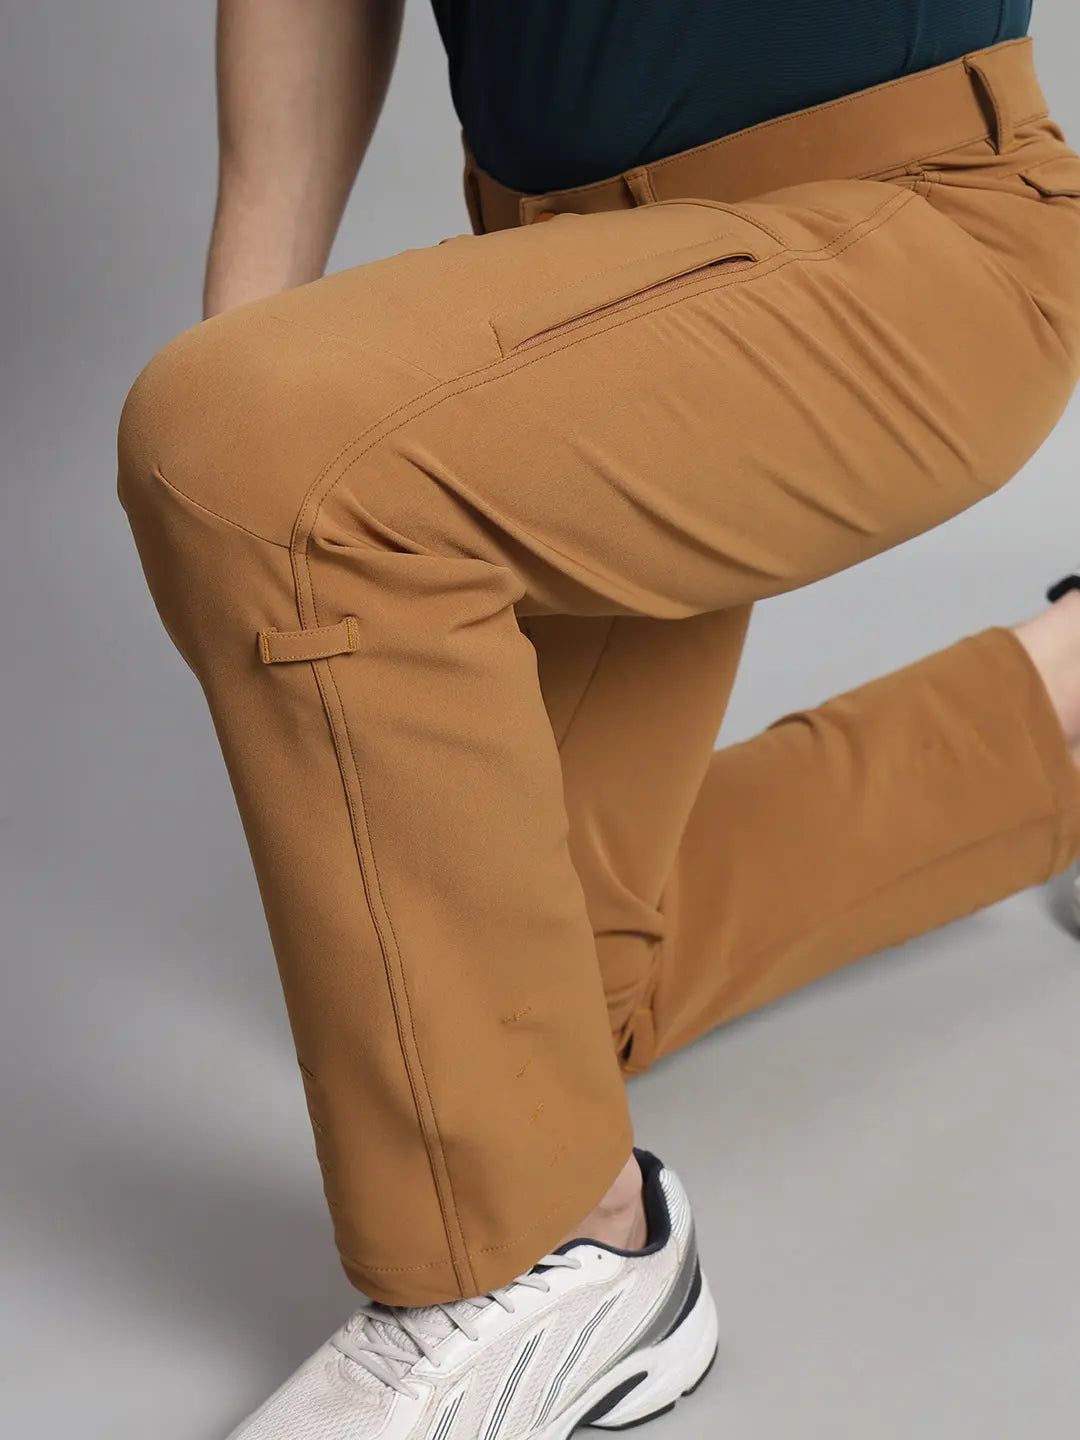 Korean Style Mens Solid Color Work Pants Soft Formal Office Trousers For  Spring And Summer Plus Size Available Style I42 From Yinqueqi, $21.91 |  DHgate.Com